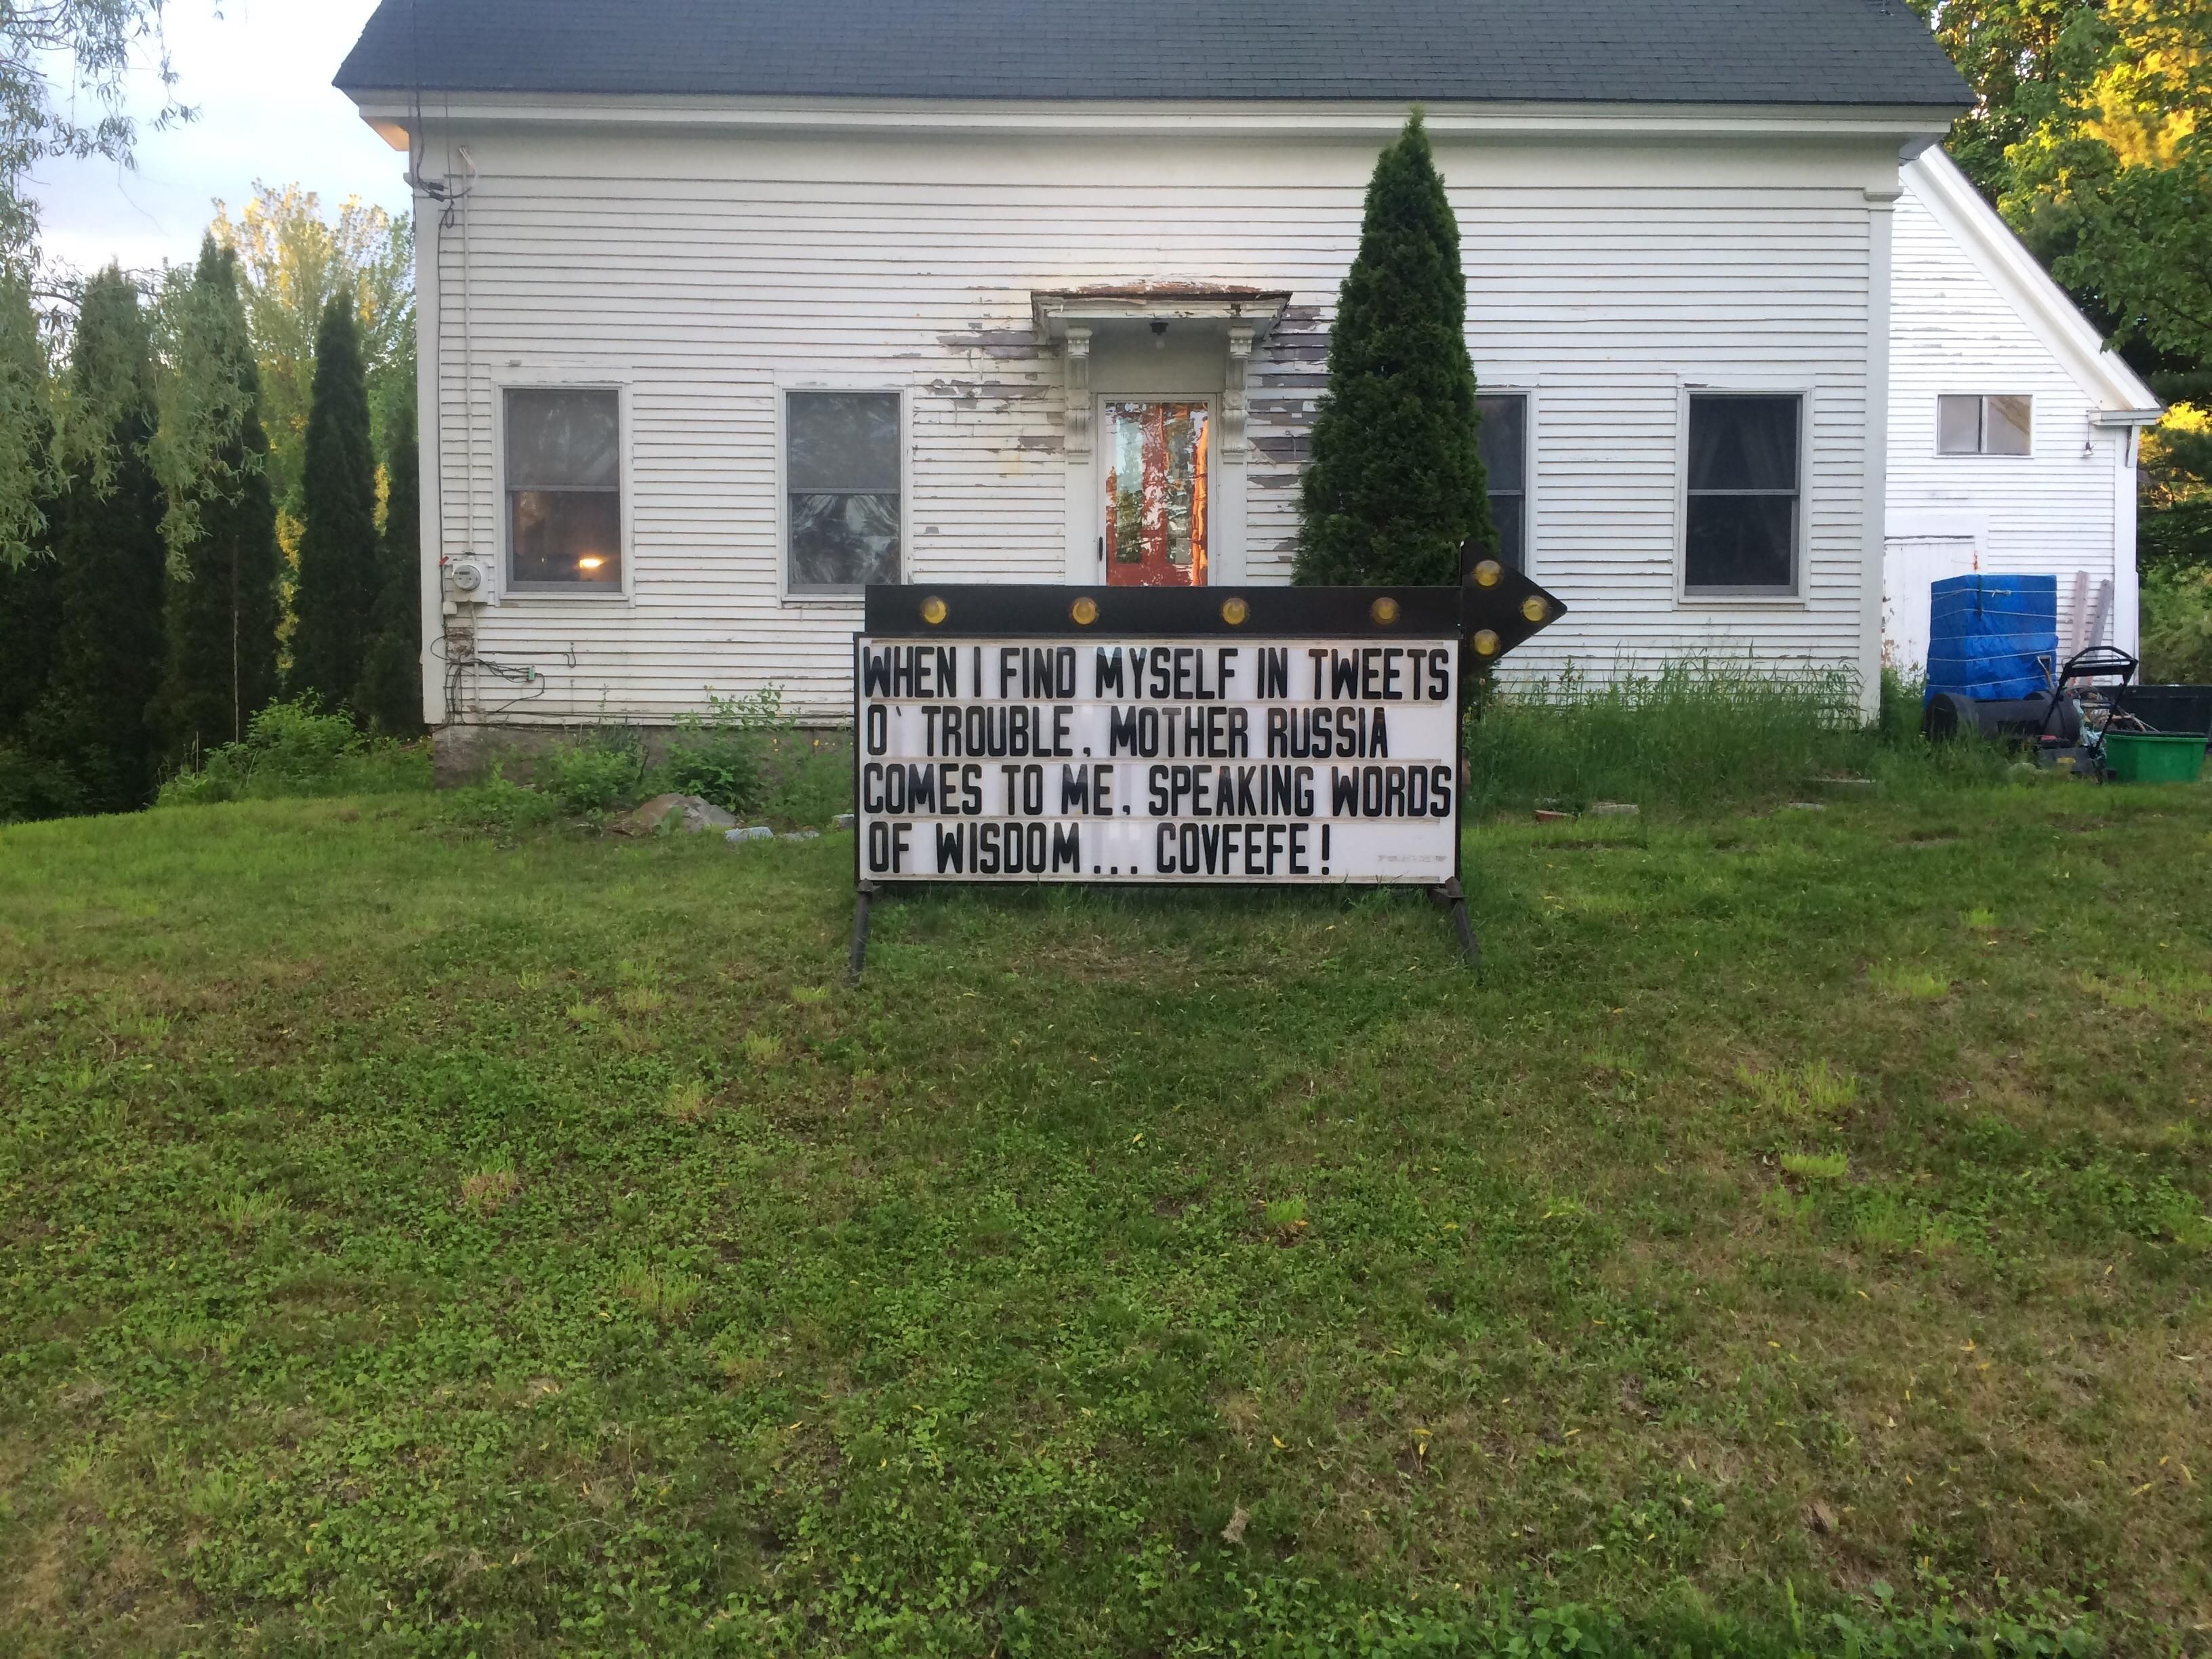 House in my town with sign on lawn. Guy changes it daily, this is today's.